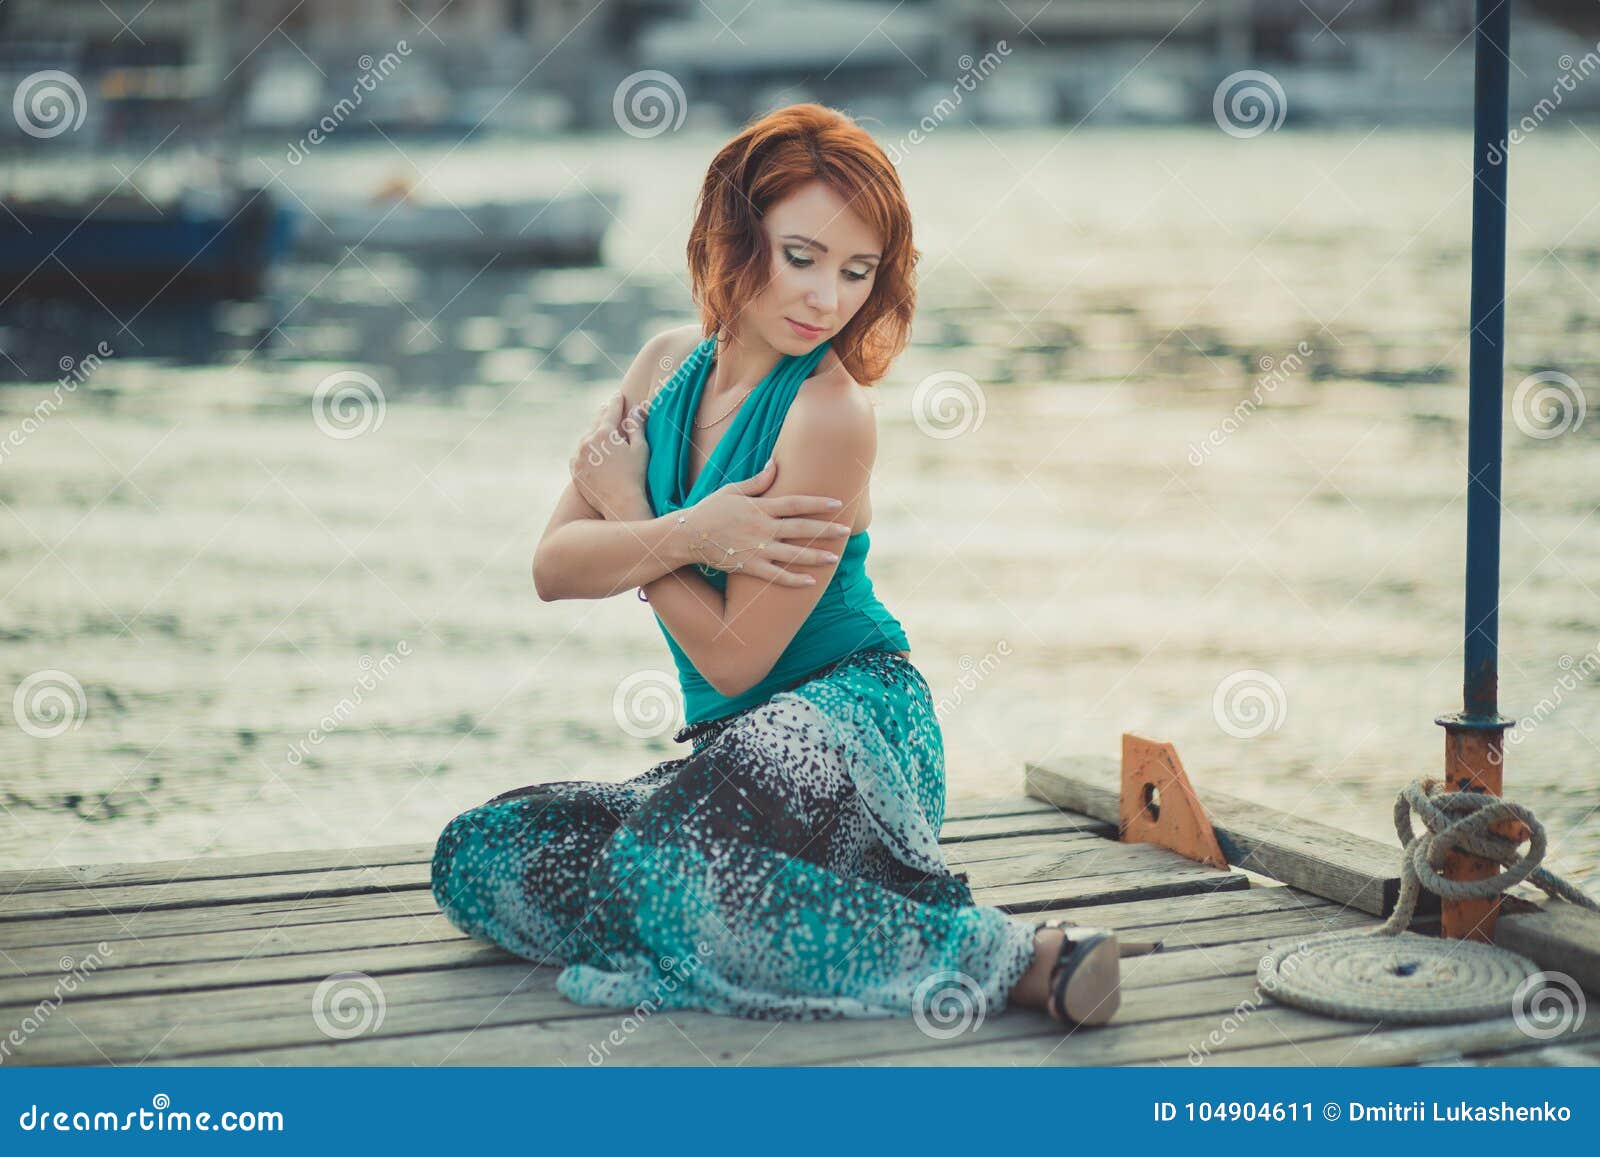 amazing beautifull lady girl woman with red flame hair wearing fancy fashion green clothes posing sitting on wooden pier jetty wth